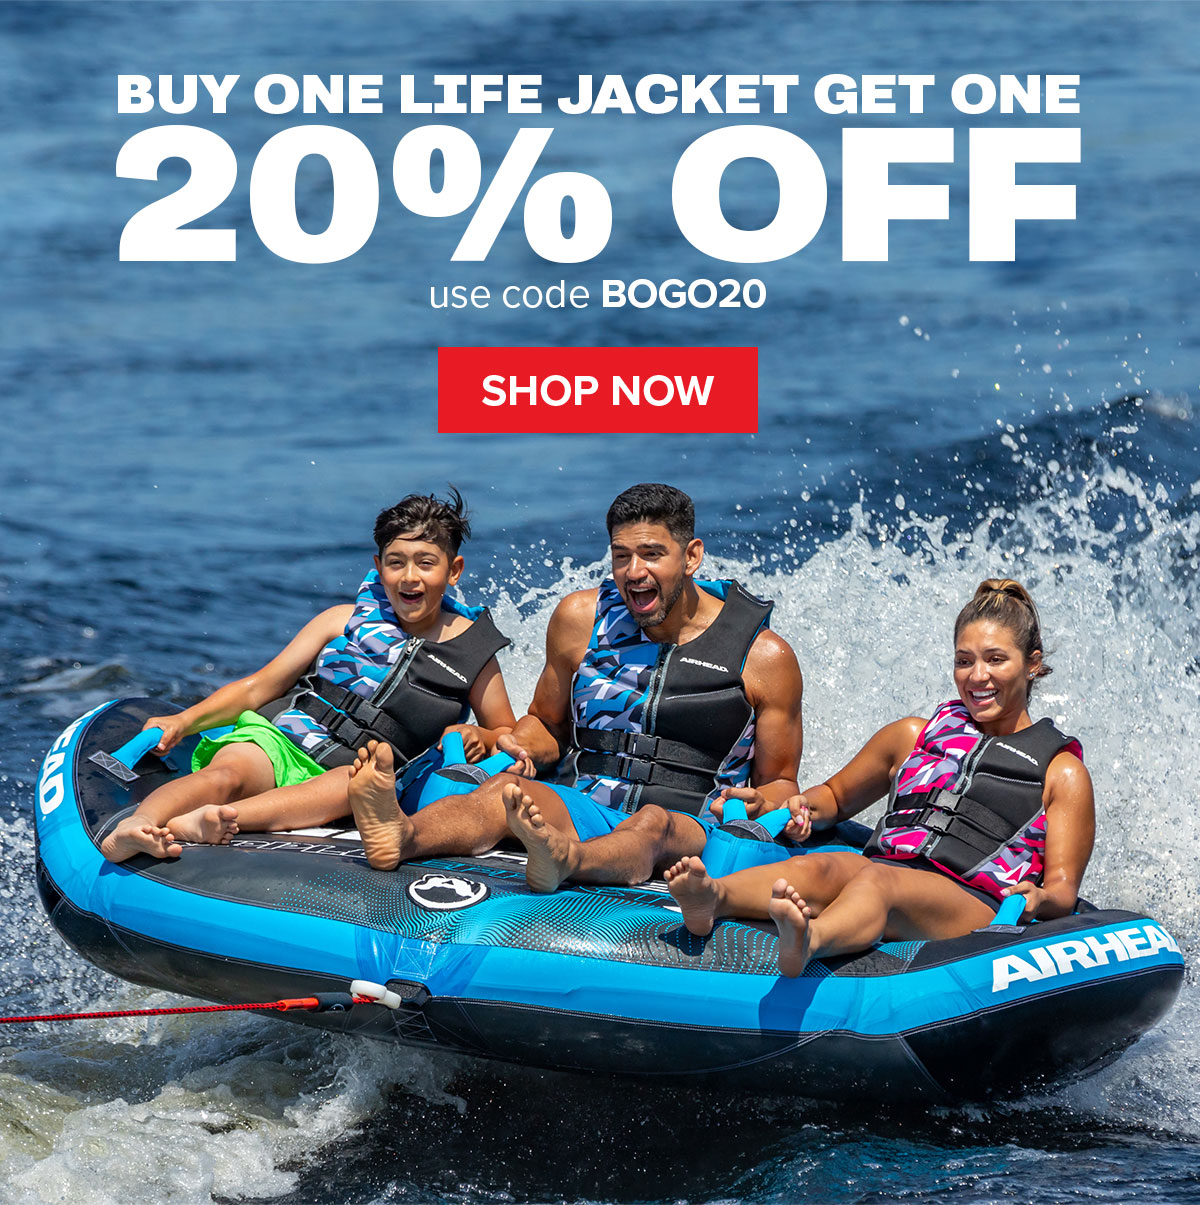 BUY ONE LIFE JACKET GET ONE 20% OFF